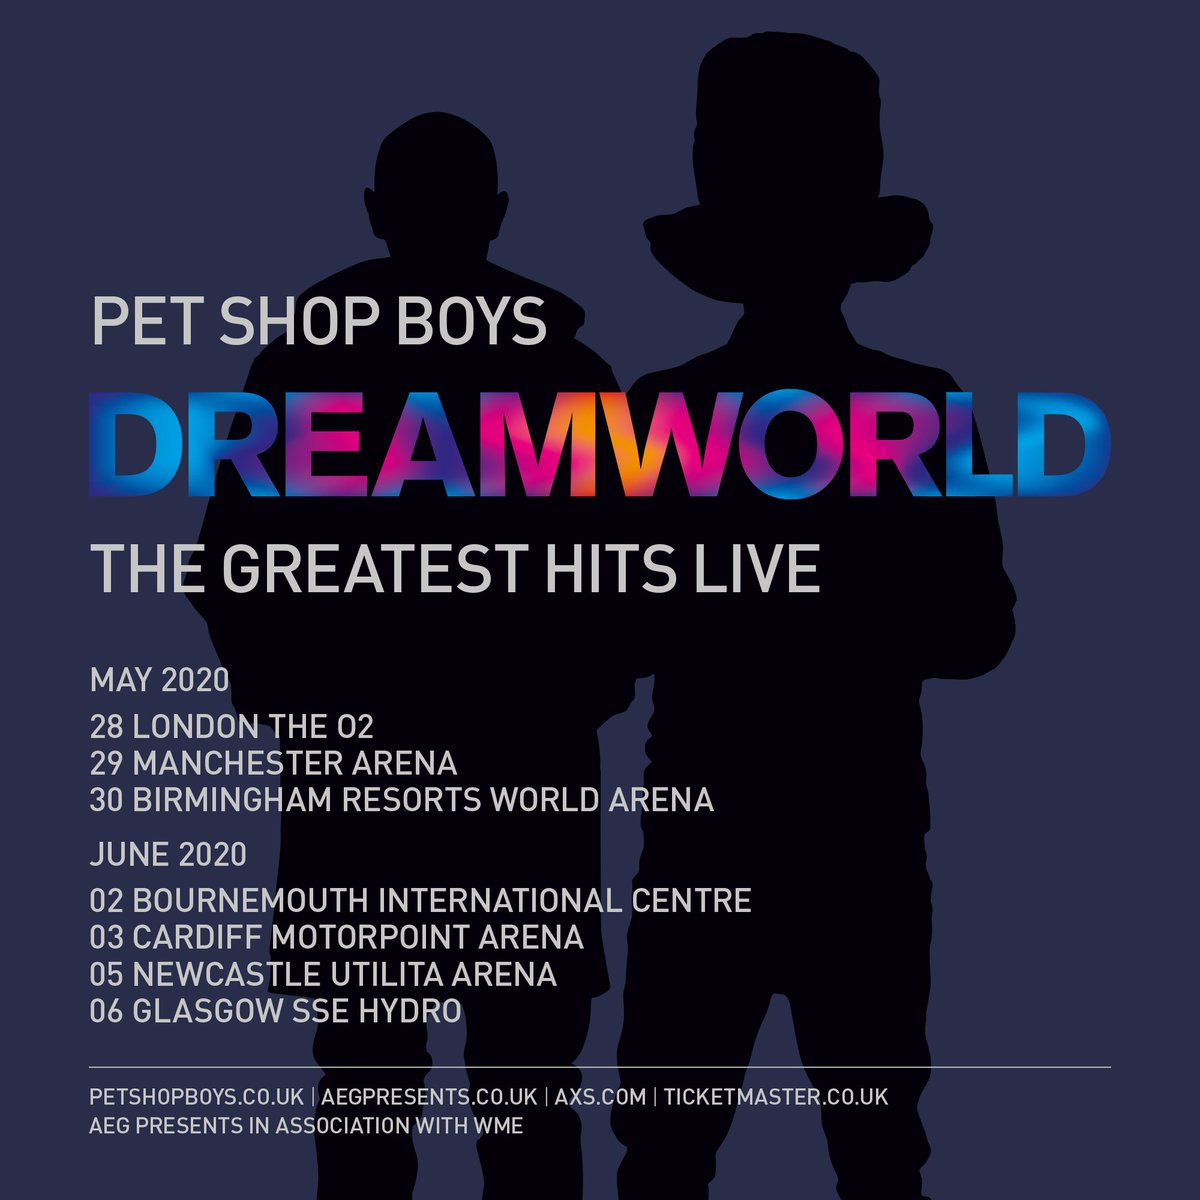 Pet Shop Boys On Twitter Pet Shop Boys Are Thrilled To Announce Seven Uk Shows To Open Their First Ever Greatest Hits Tour Dreamworld The Greatest Hits Live In May June 2020